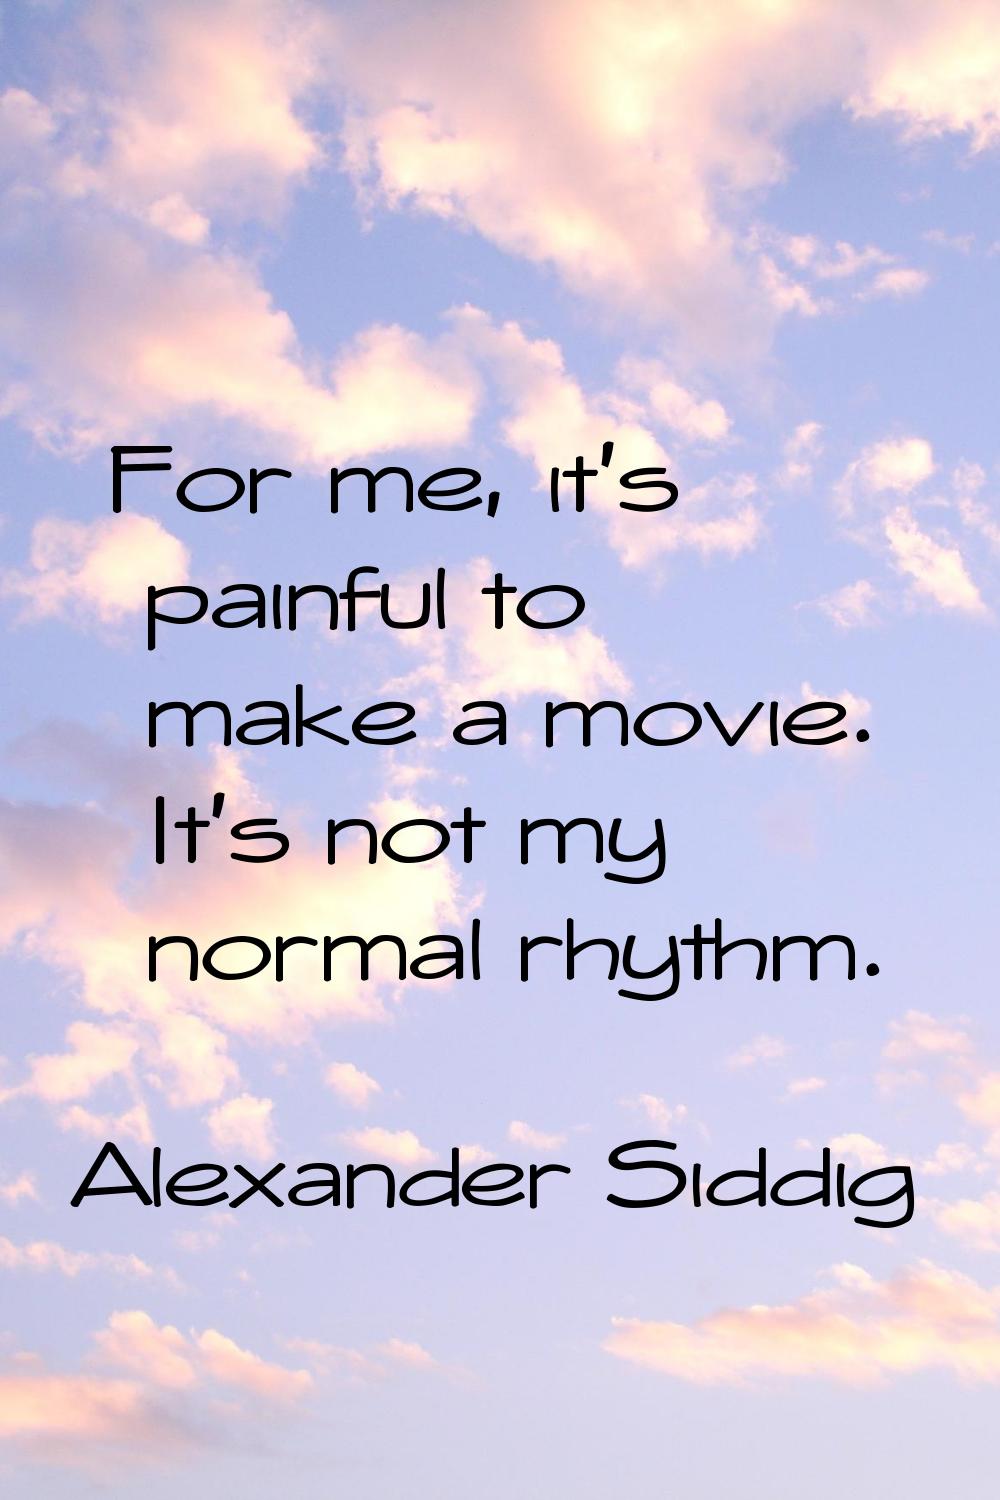 For me, it's painful to make a movie. It's not my normal rhythm.